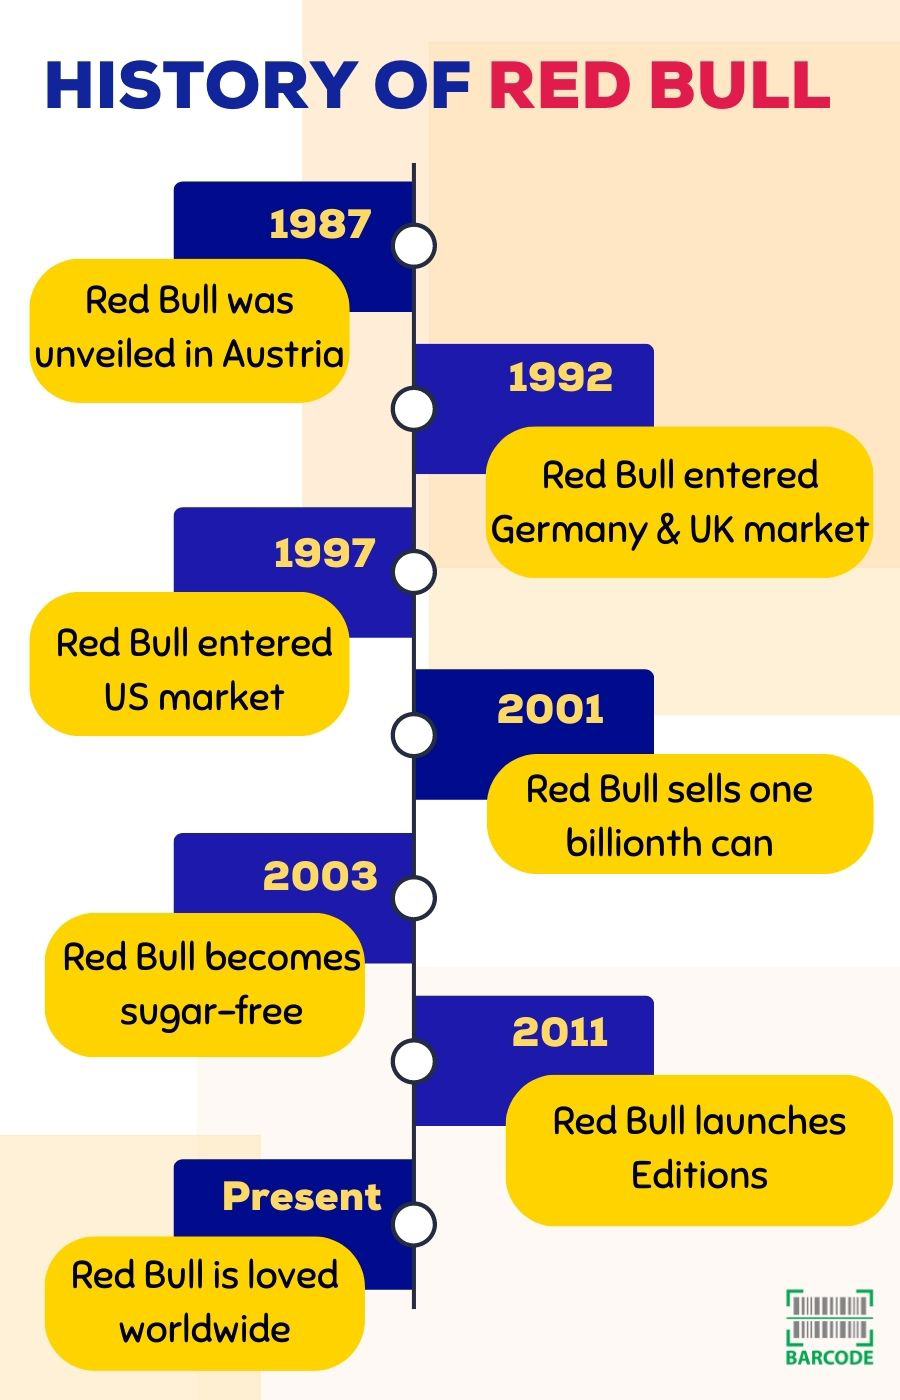 The history of Red Bull brand